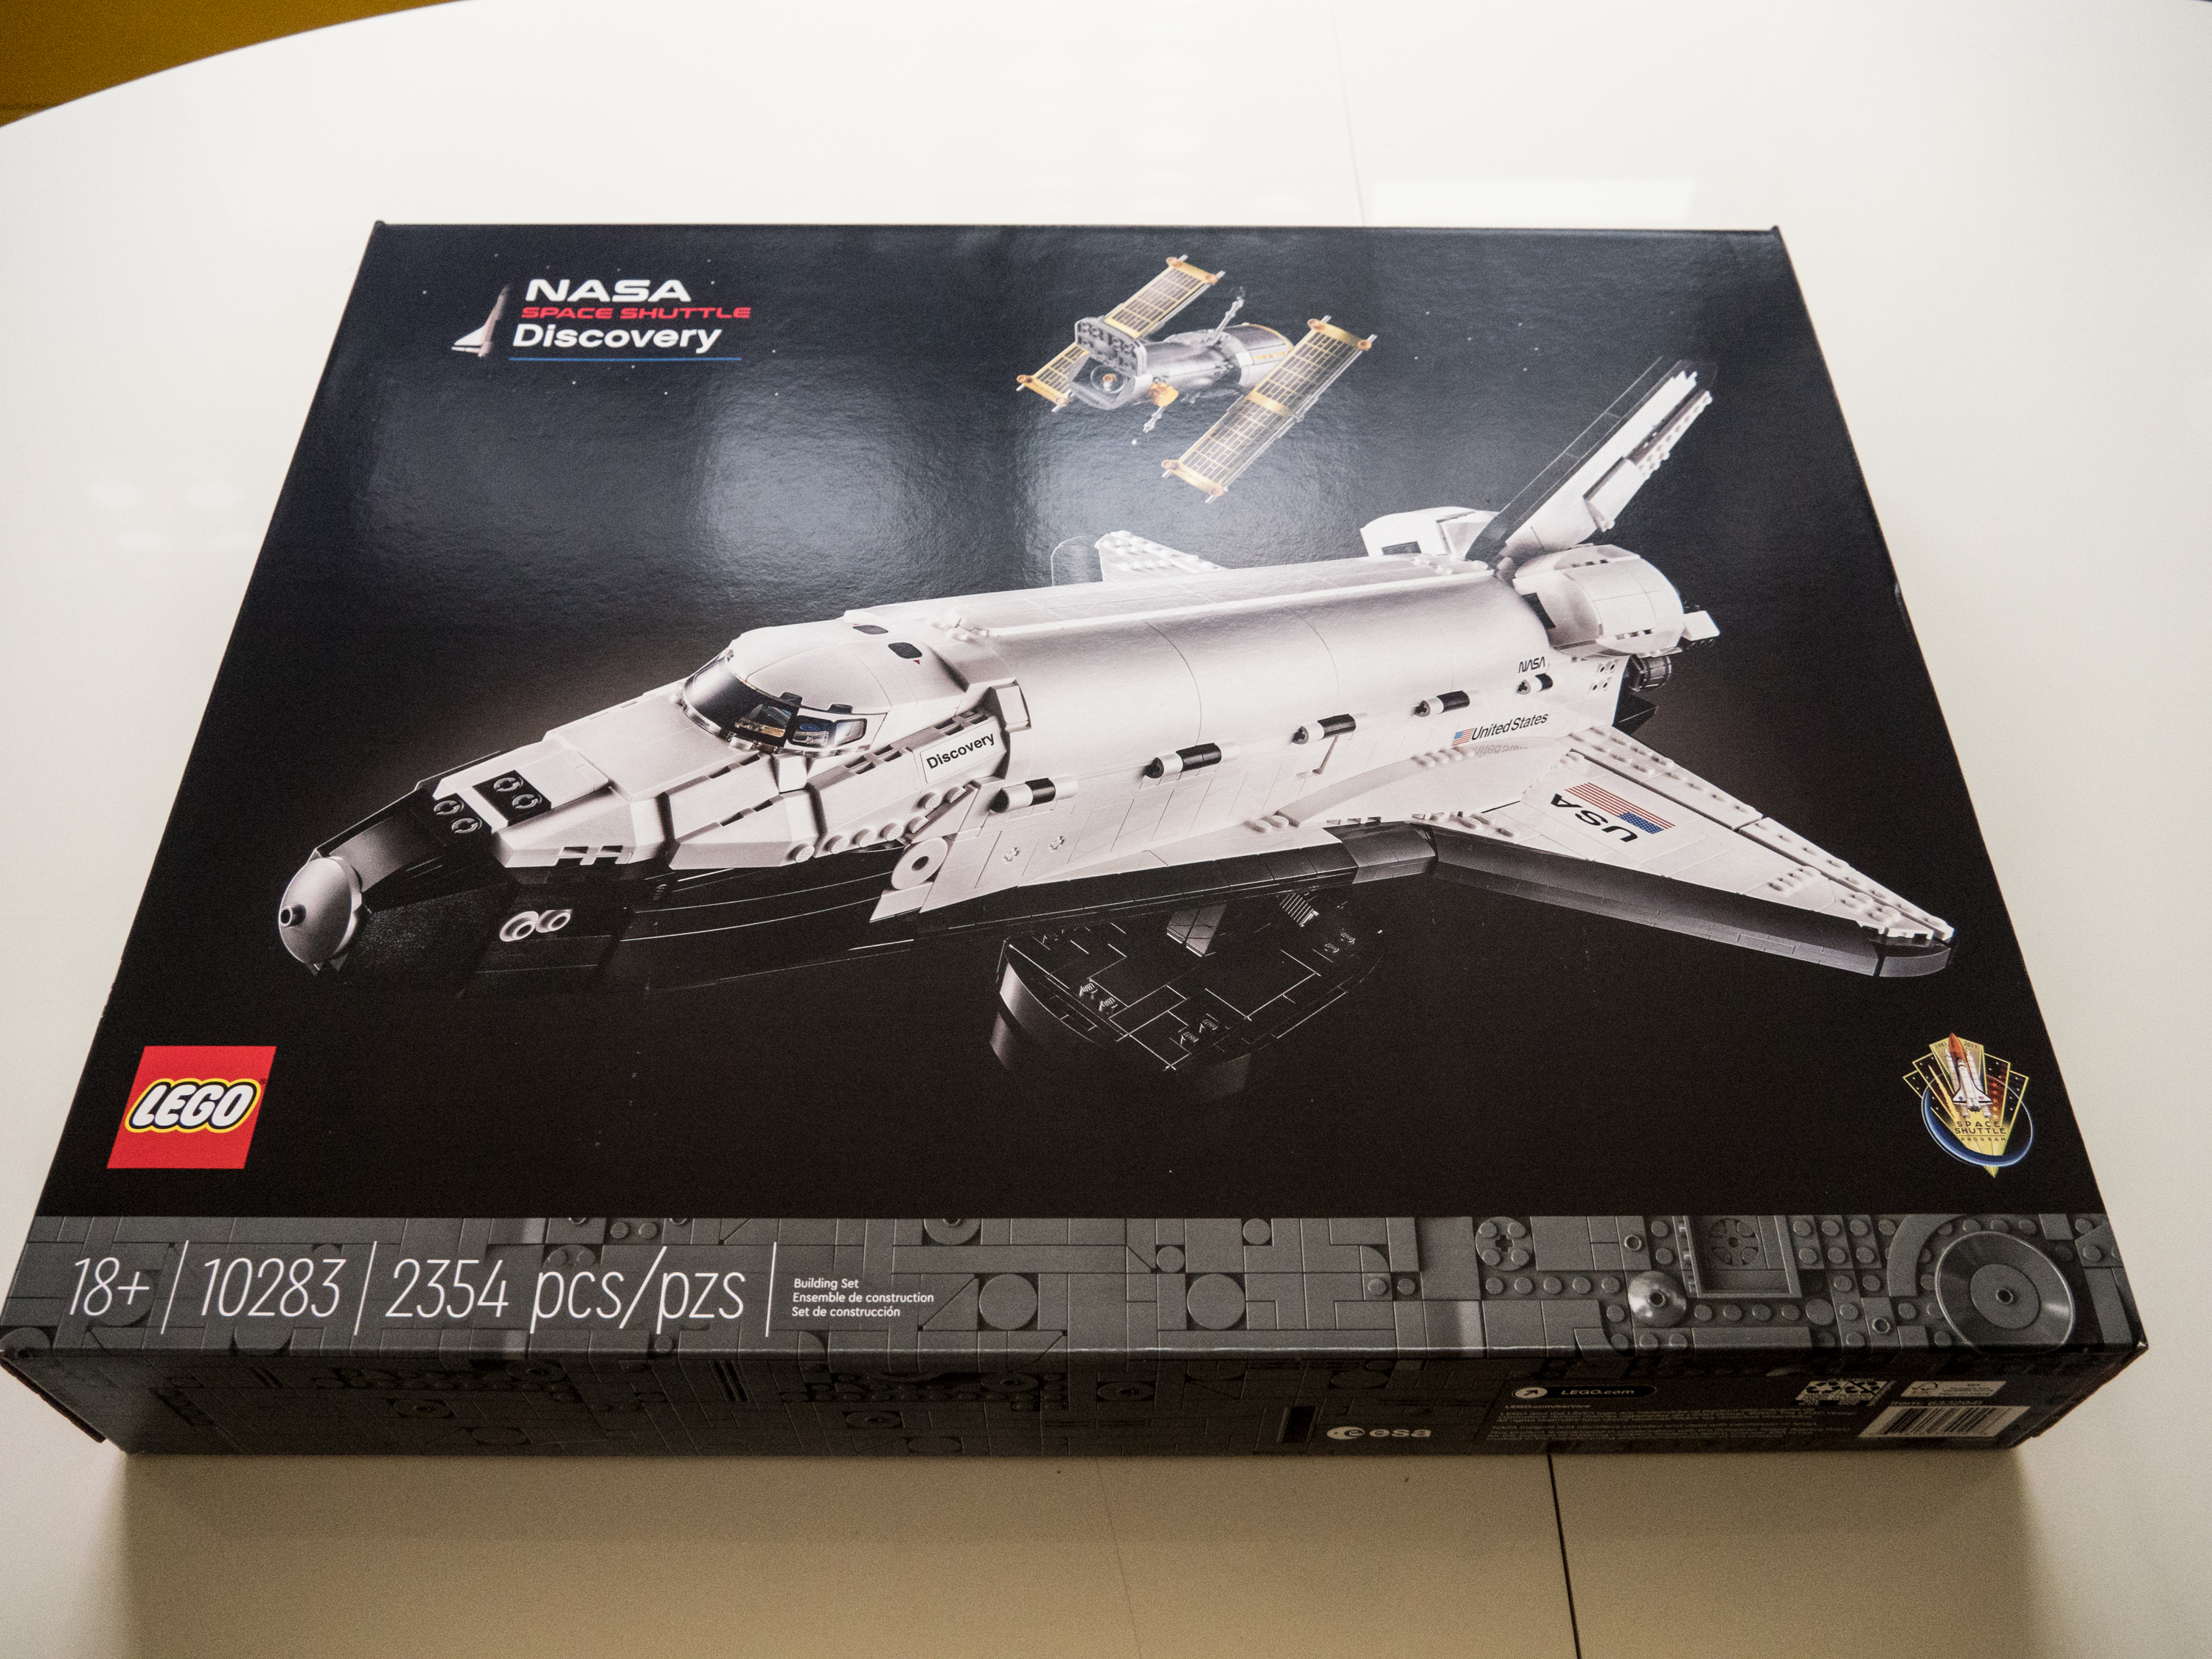 Lego has a new 2,354-piece NASA Space Shuttle set, and it's awesome Ars Technica